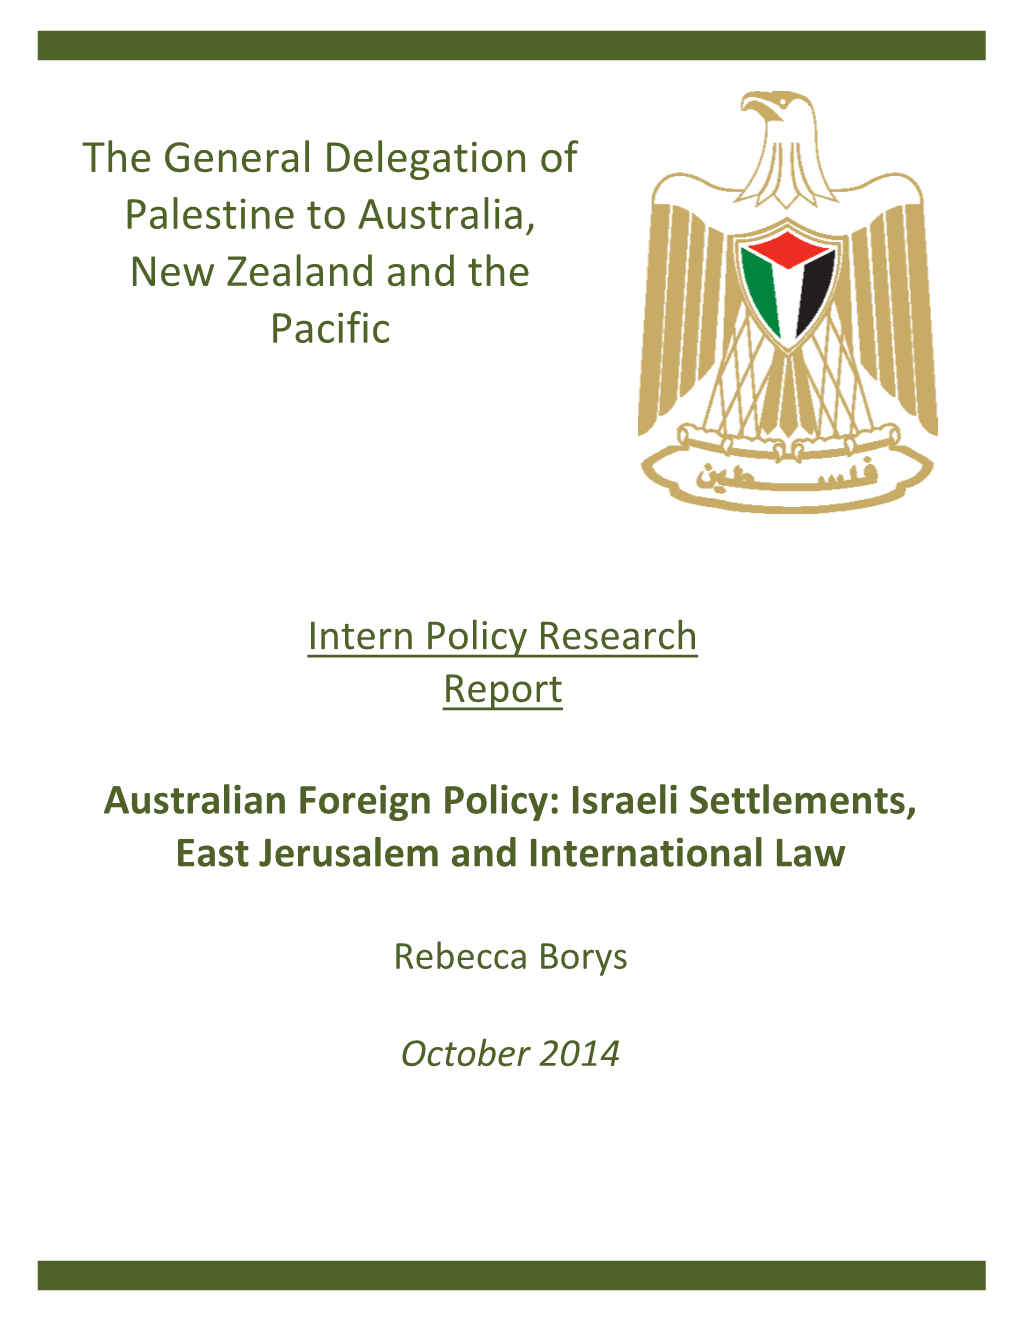 The General Delegation of Palestine to Australia, New Zealand and the Pacific